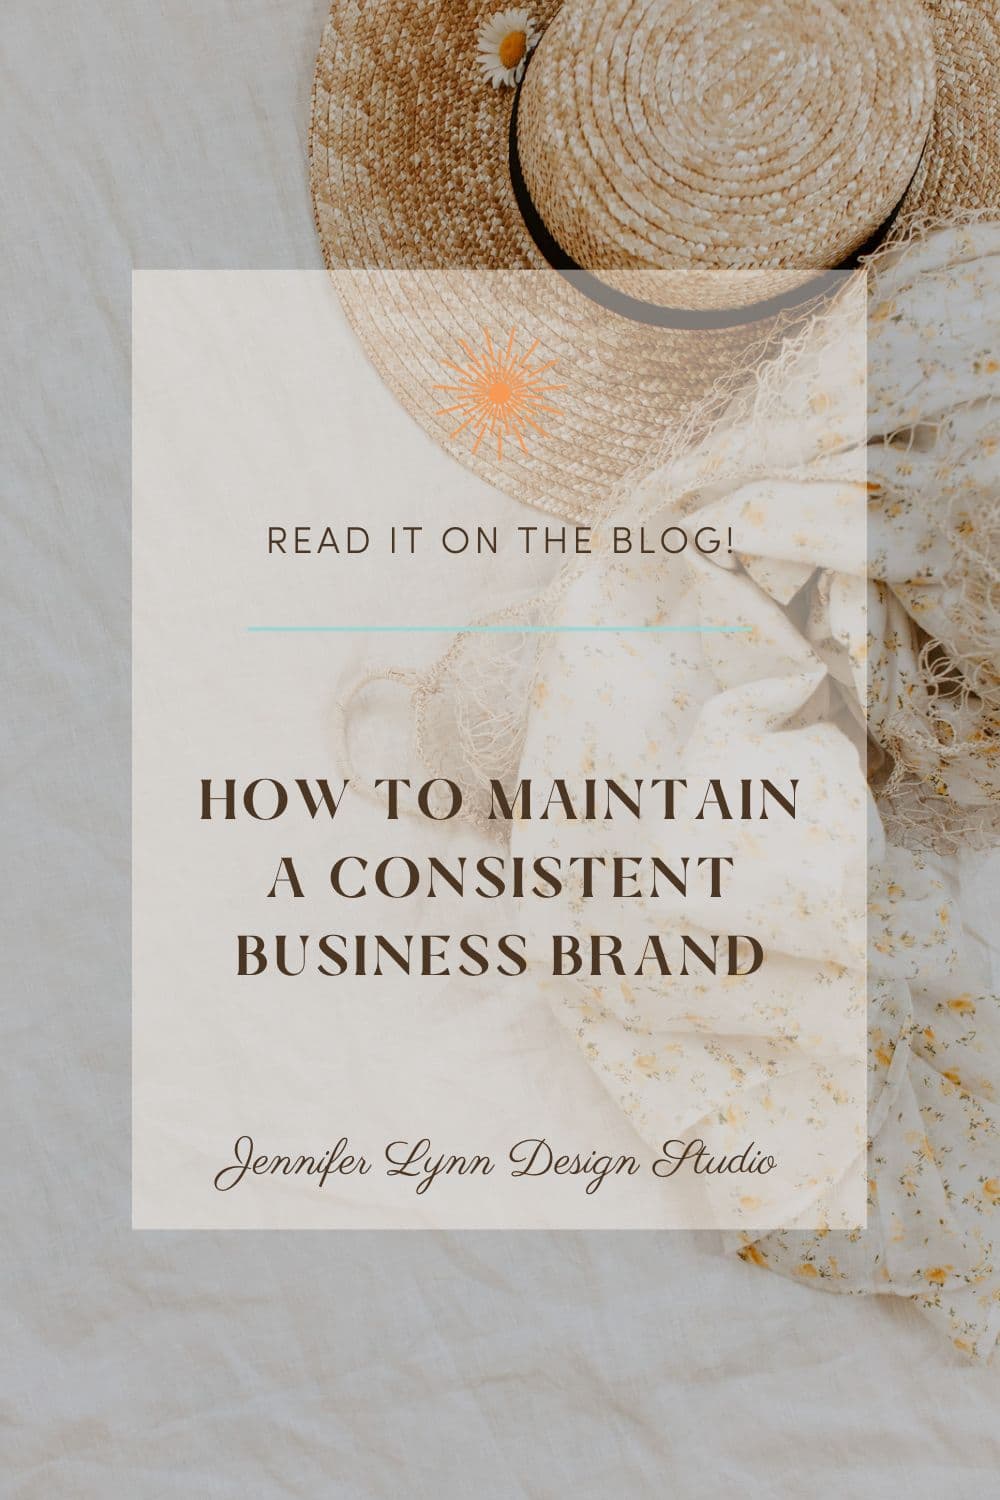 How to Maintain A Consistent Business Brand by Jennifer Lynn Design Studio